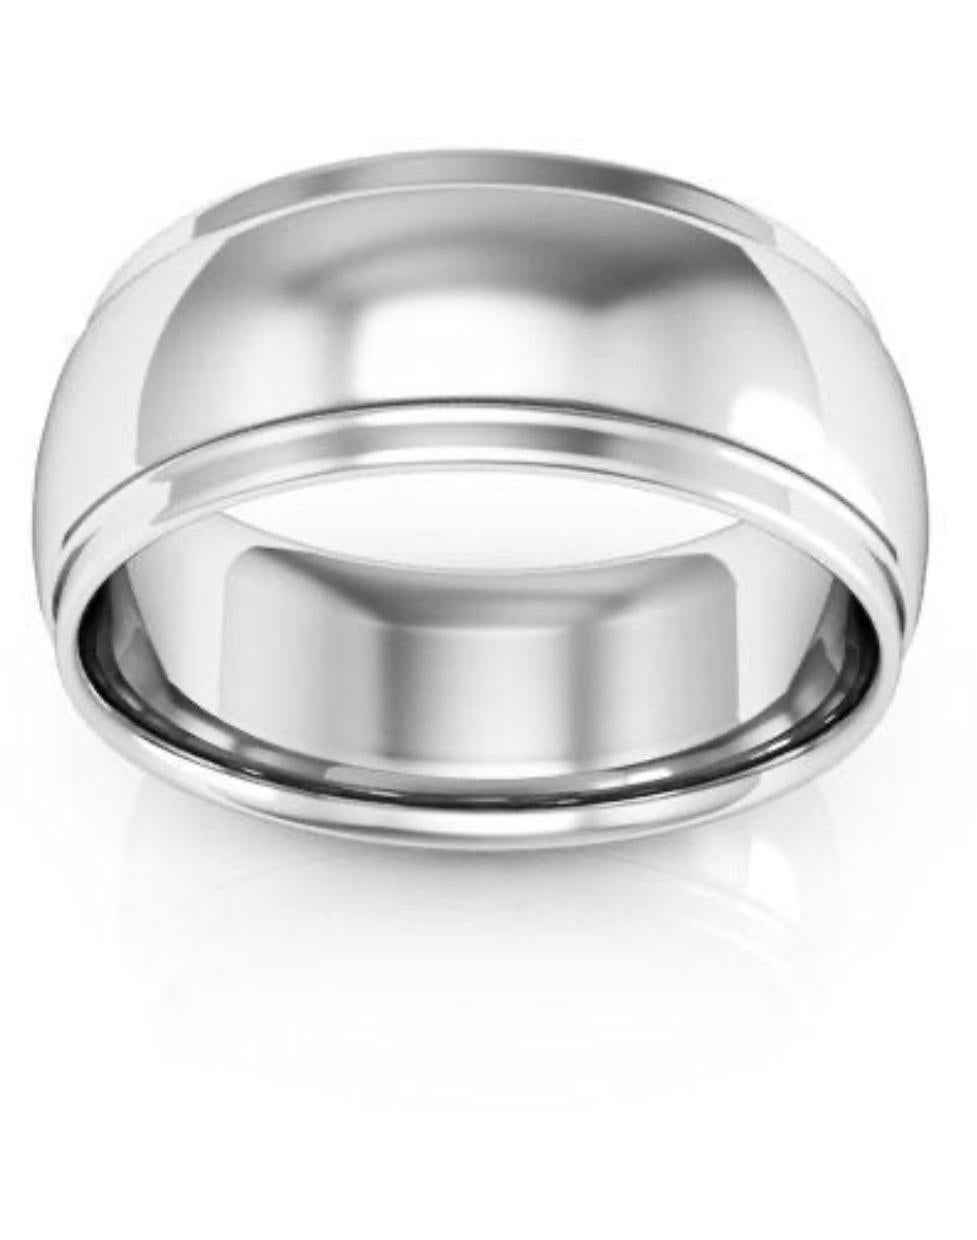 14 Karat White Gold Half Round Edge Wedding Band, 9 mm wide Estate, Size 11
This timeless style has  the slight  domed band.Quality craftsmanship makes this long lasting band a great value. 

High Polish
Unisex  wedding band
 14 karat White gold 
